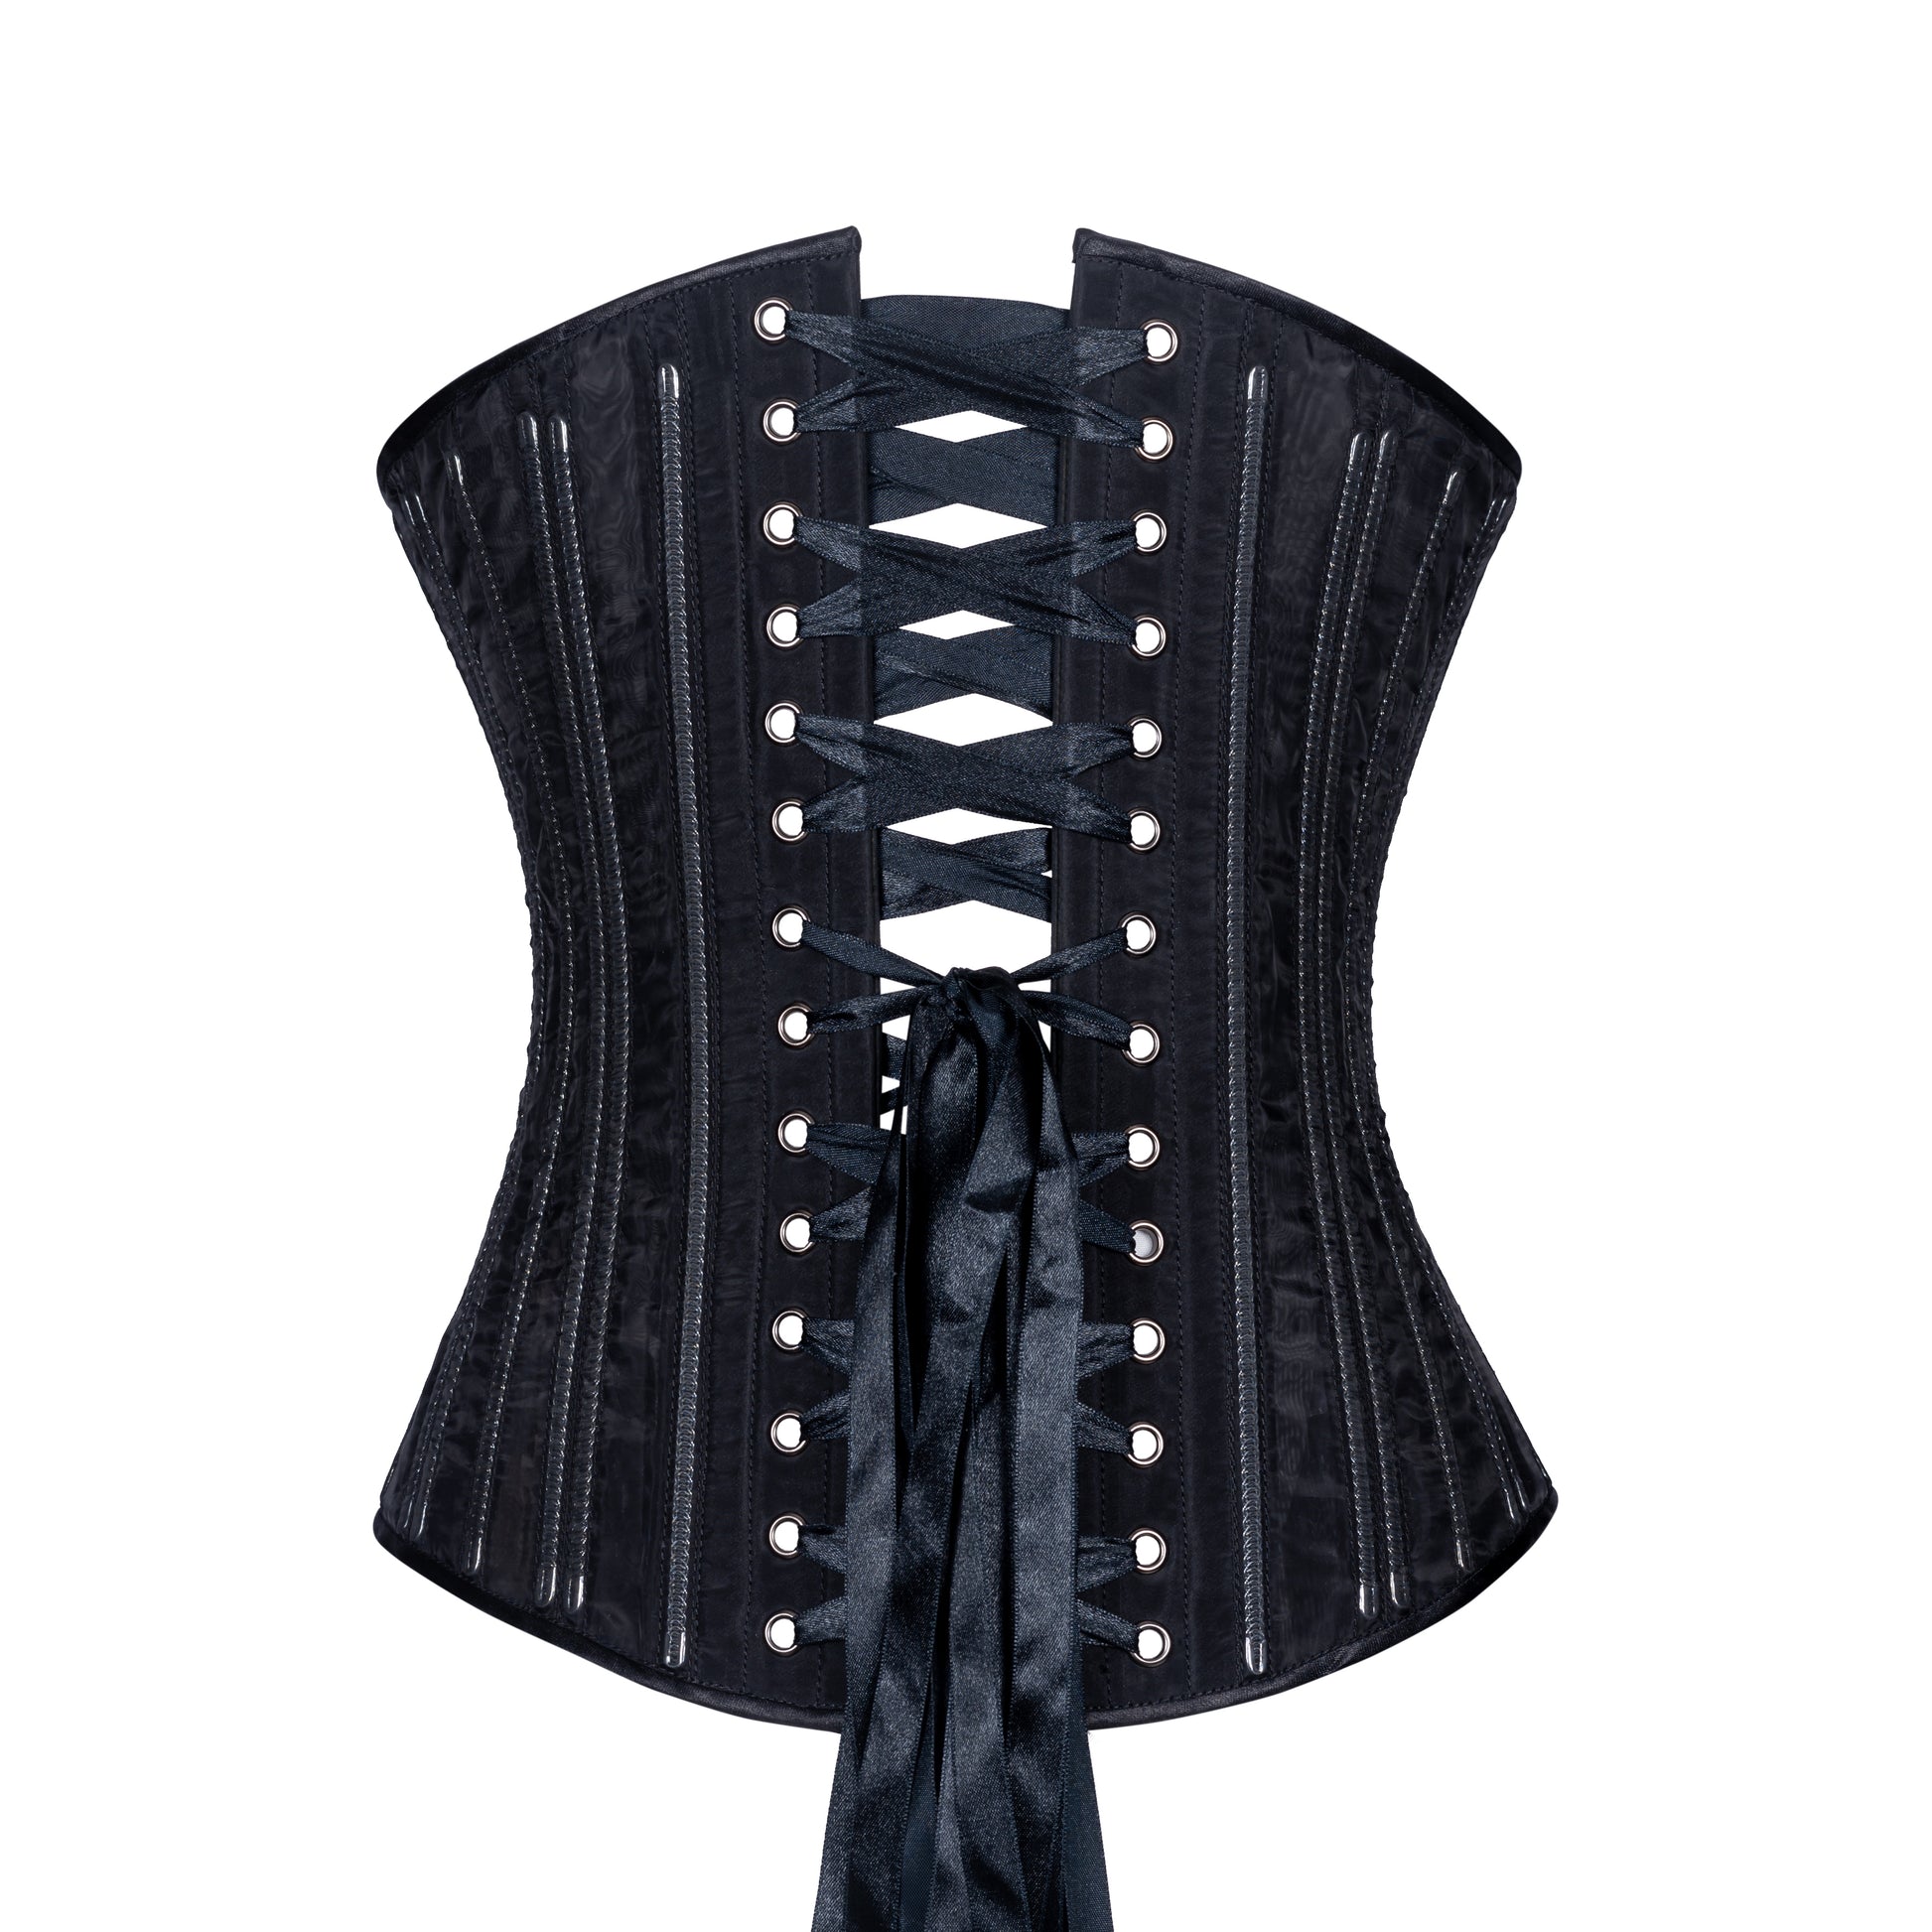 Corset Lacing - The Best Way To Lace Up For Quick & Hassle Free Dressing